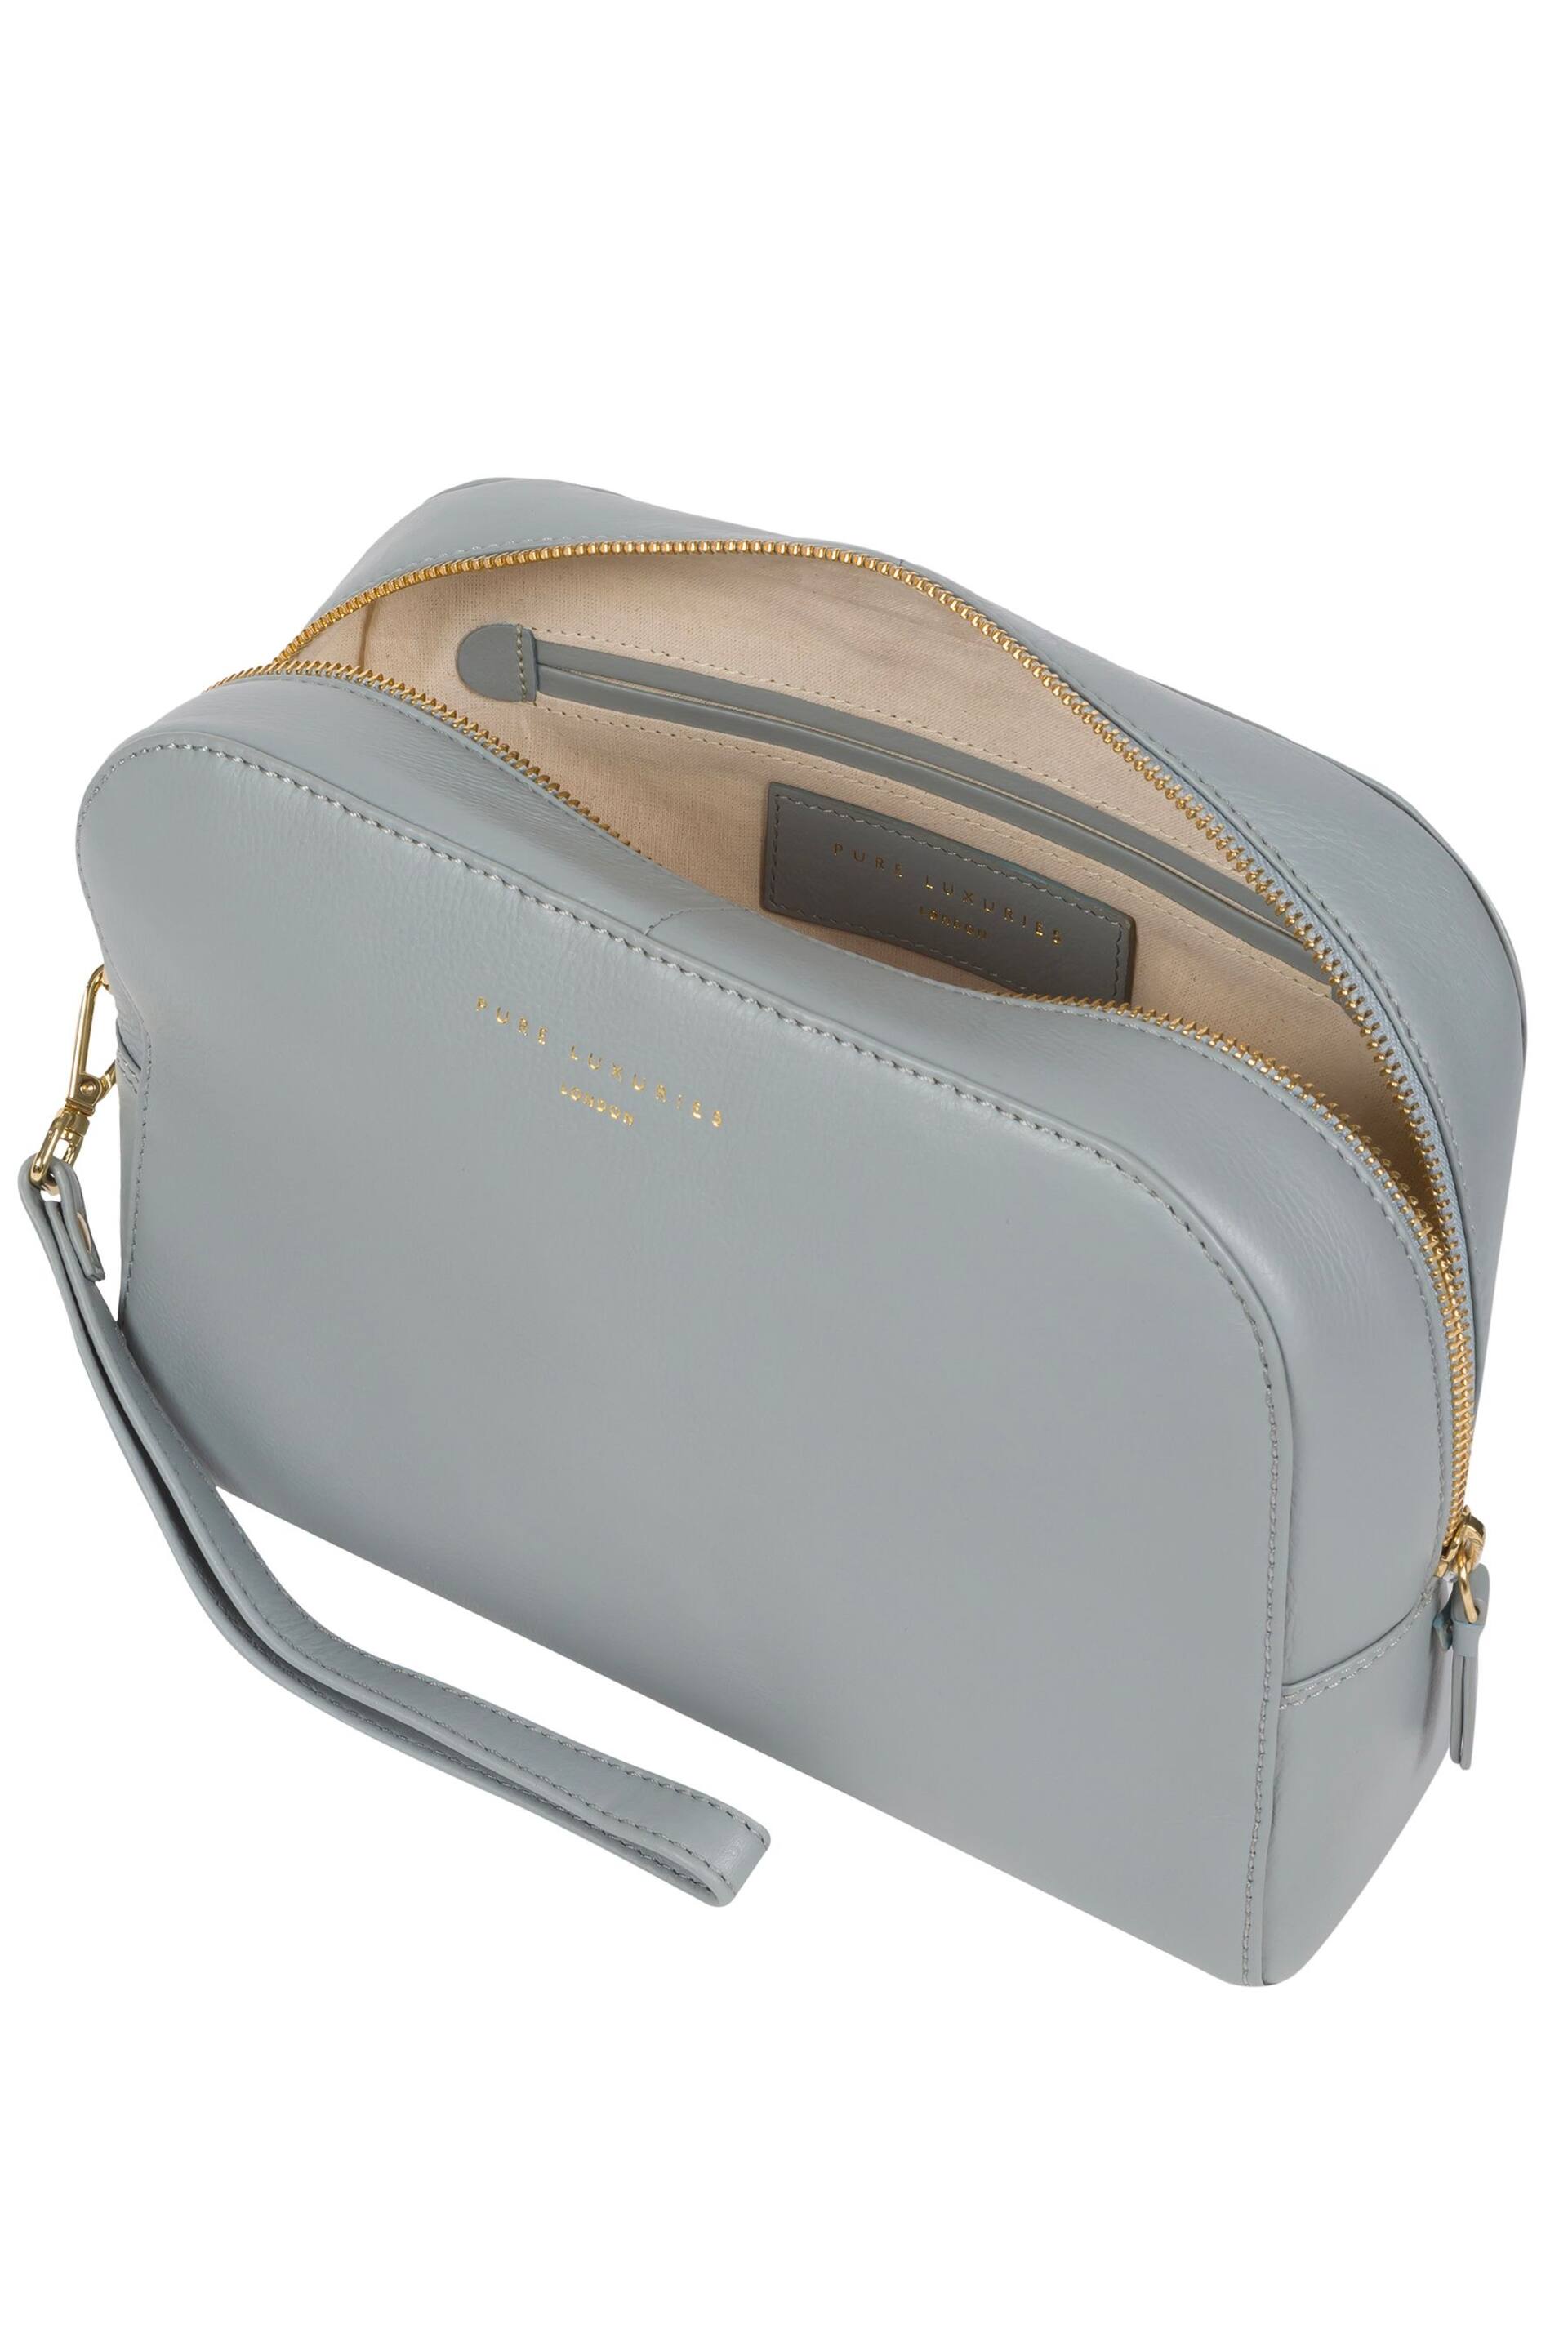 Pure Luxuries London Brompton Leather Cosmetic Bag - Image 4 of 5